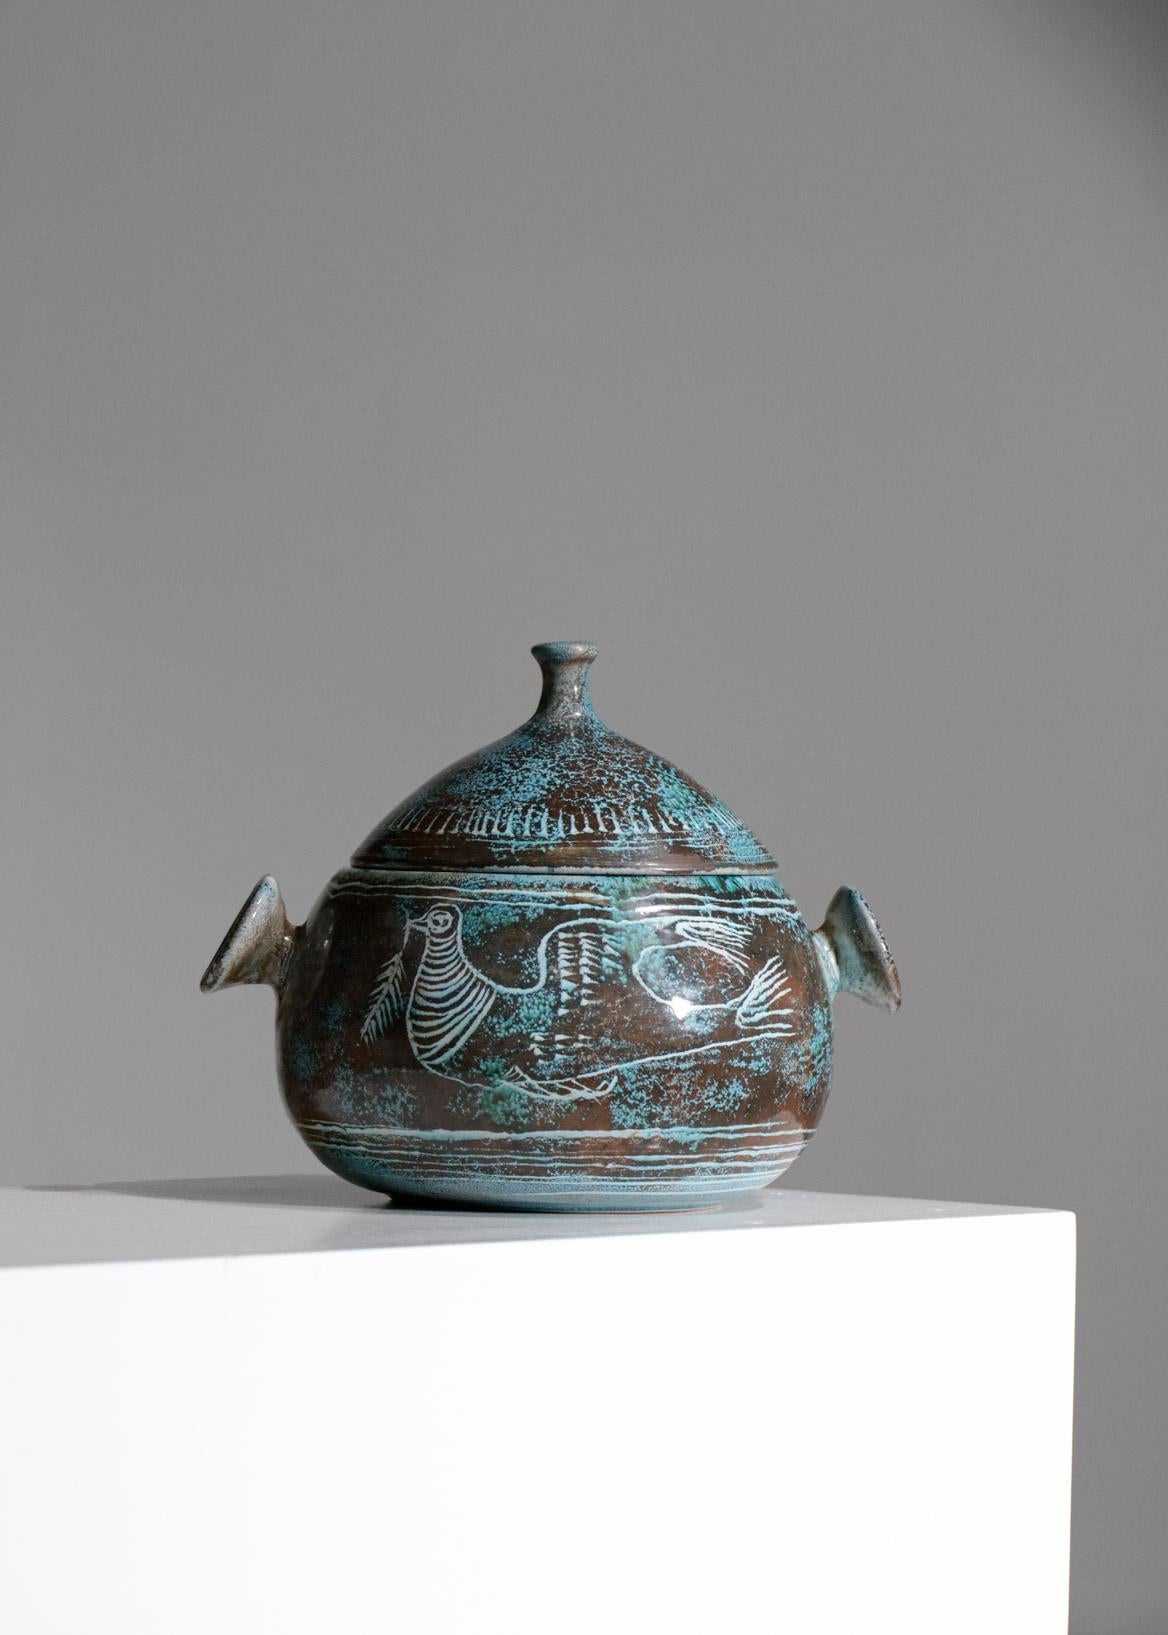 Ceramic tureen from the Yvon Roy Montgolfier workshop in Durtal. Glazed ceramic in blue, bronze and green colours, decorated with a beautiful bird design and geometrical motifs of tribal inspiration. Very good general condition, presence of the